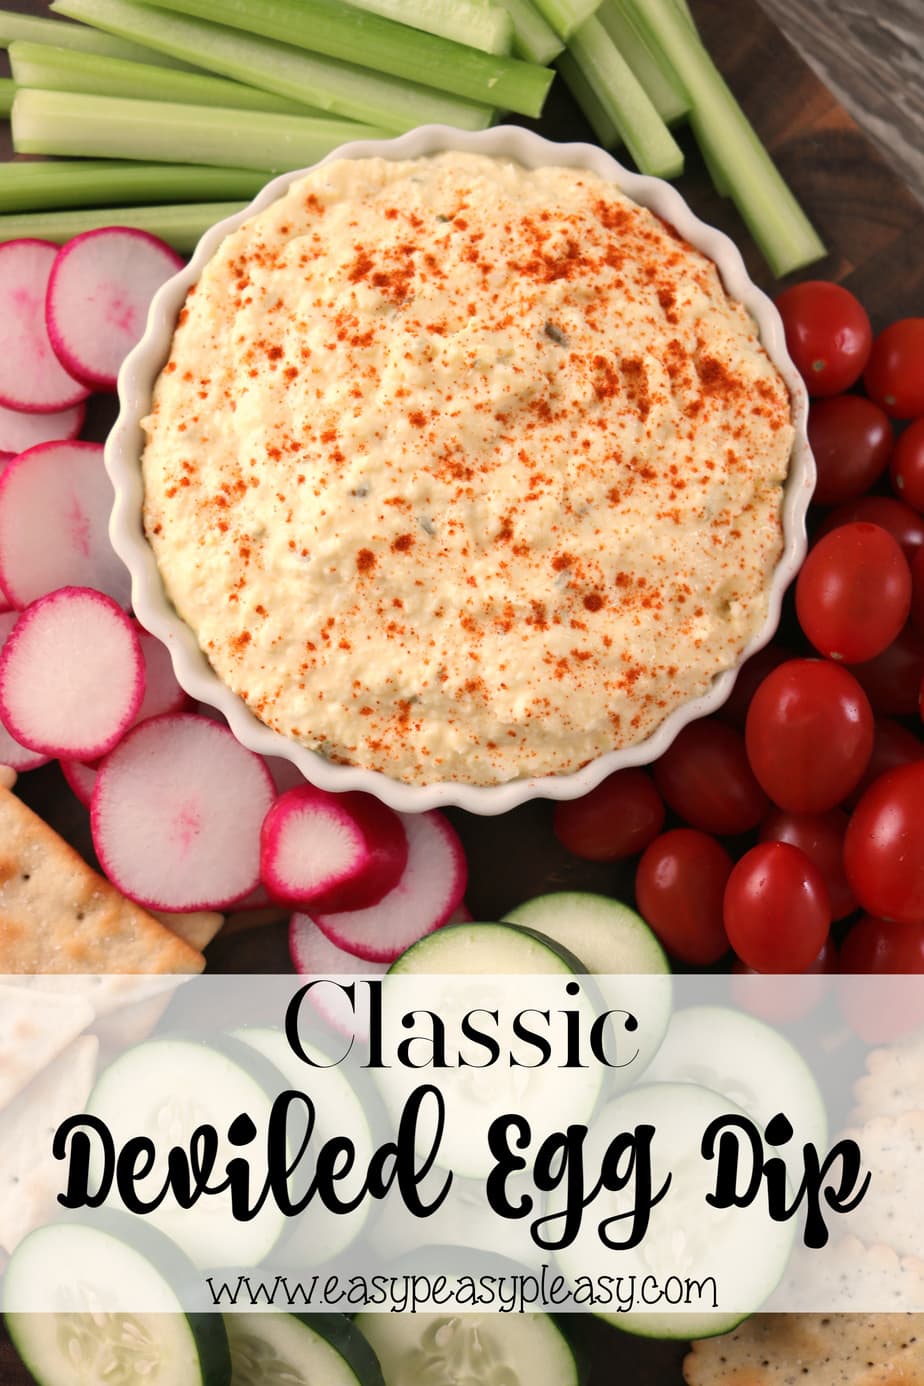 Classic Deviled Egg Dip is the perfect appetizer or addition to any meal or holiday. #deviledegg #deviledeggs #deviledeggdip #appetizer #partyfood #holidayfood